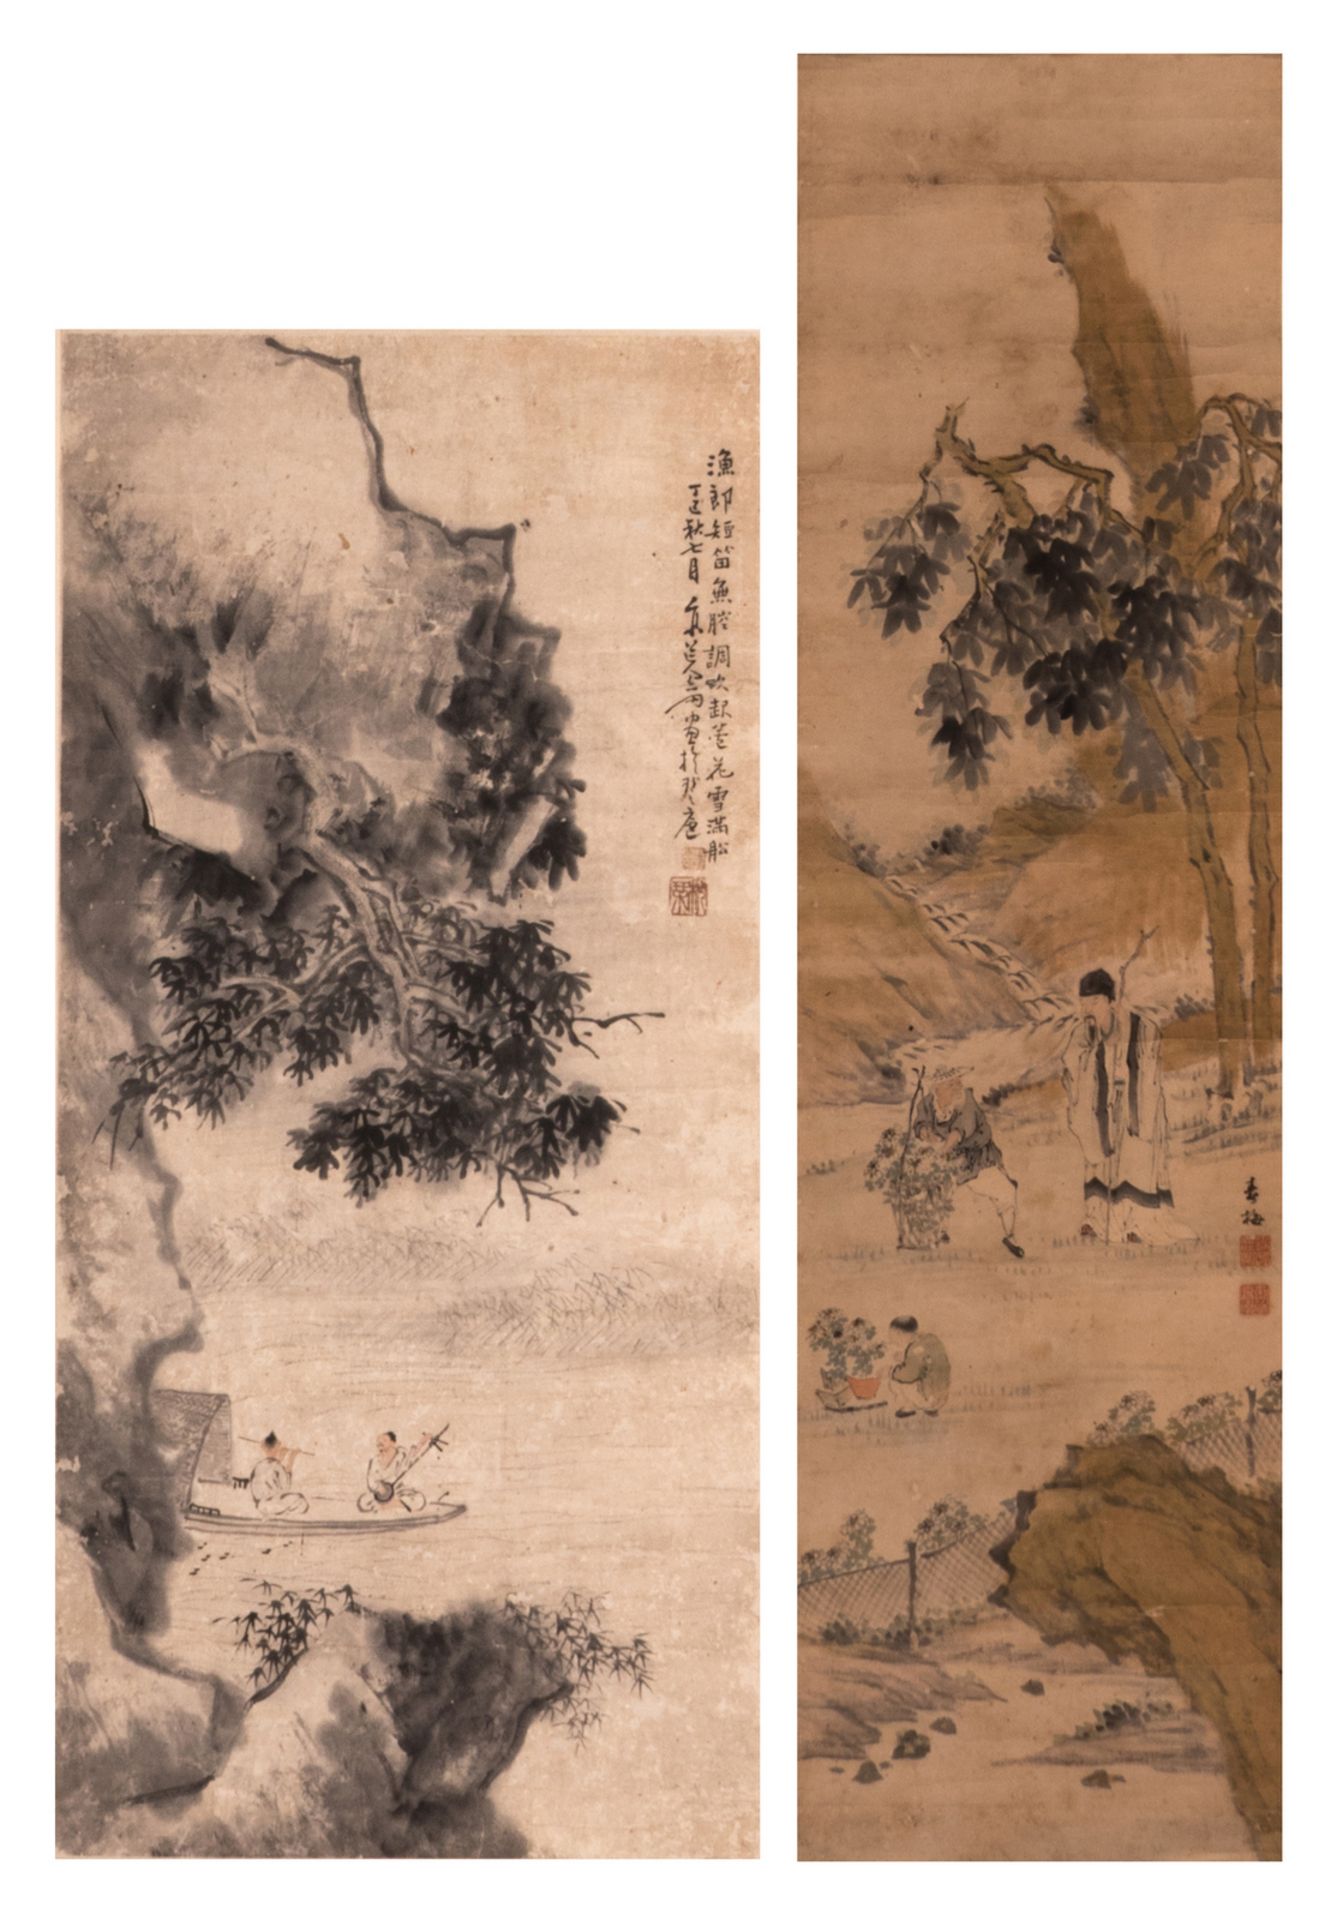 Two Chinese scrolls: one depicting music making men on a sampan, 27 x 58,5 - 38 x 152,7 cm (with